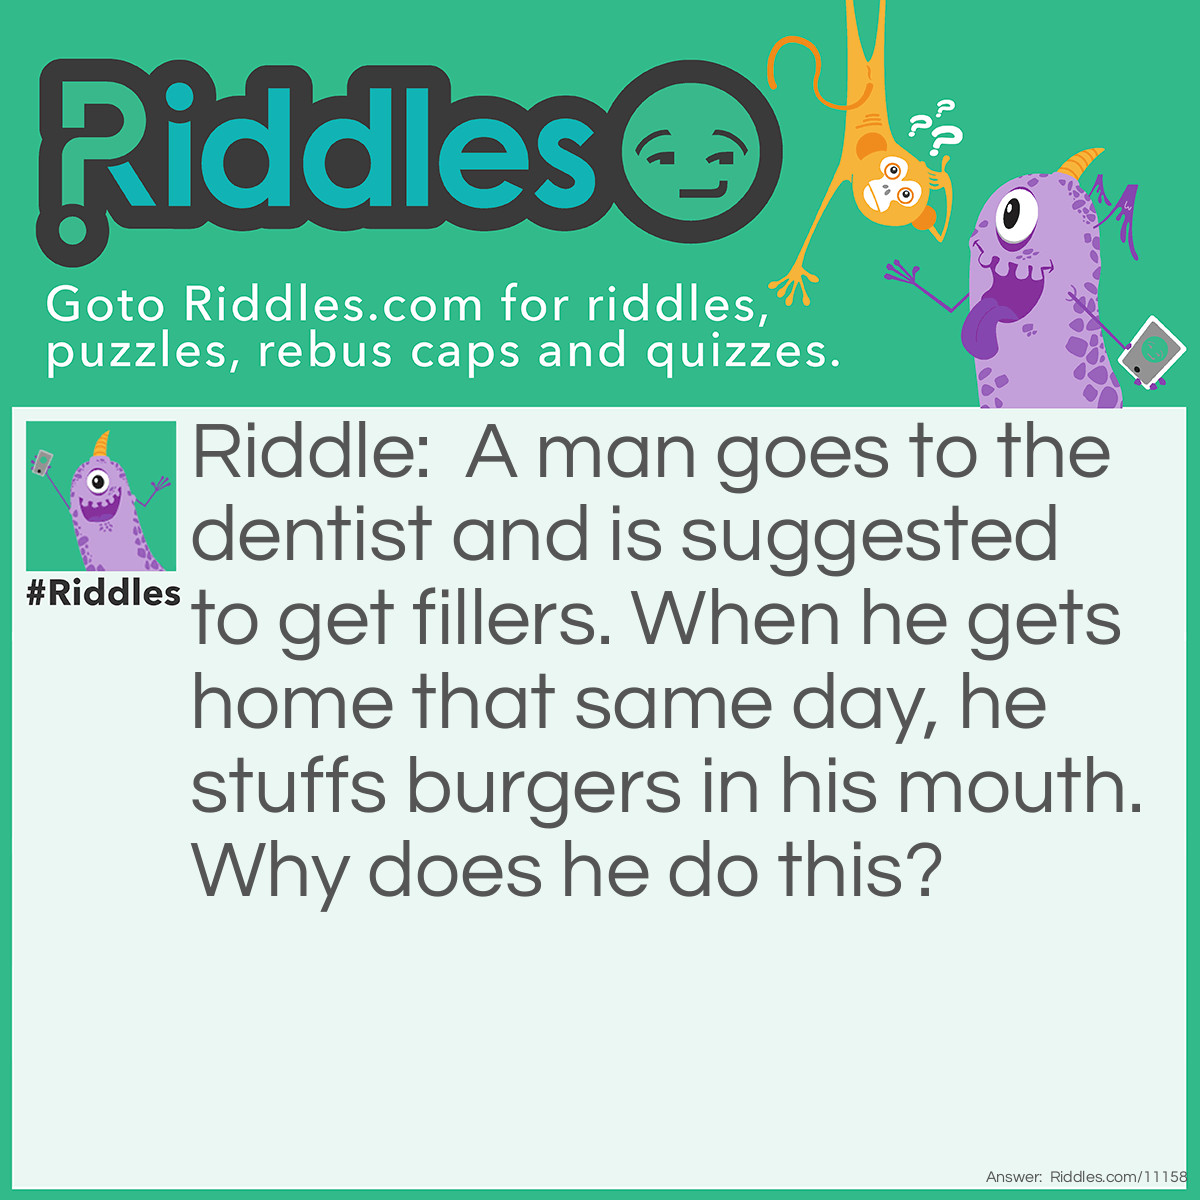 Riddle: A man goes to the dentist and is suggested to get fillers. When he gets home that same day, he stuffs burgers in his mouth. Why does he do this? Answer: He filled his mouth with burgers.